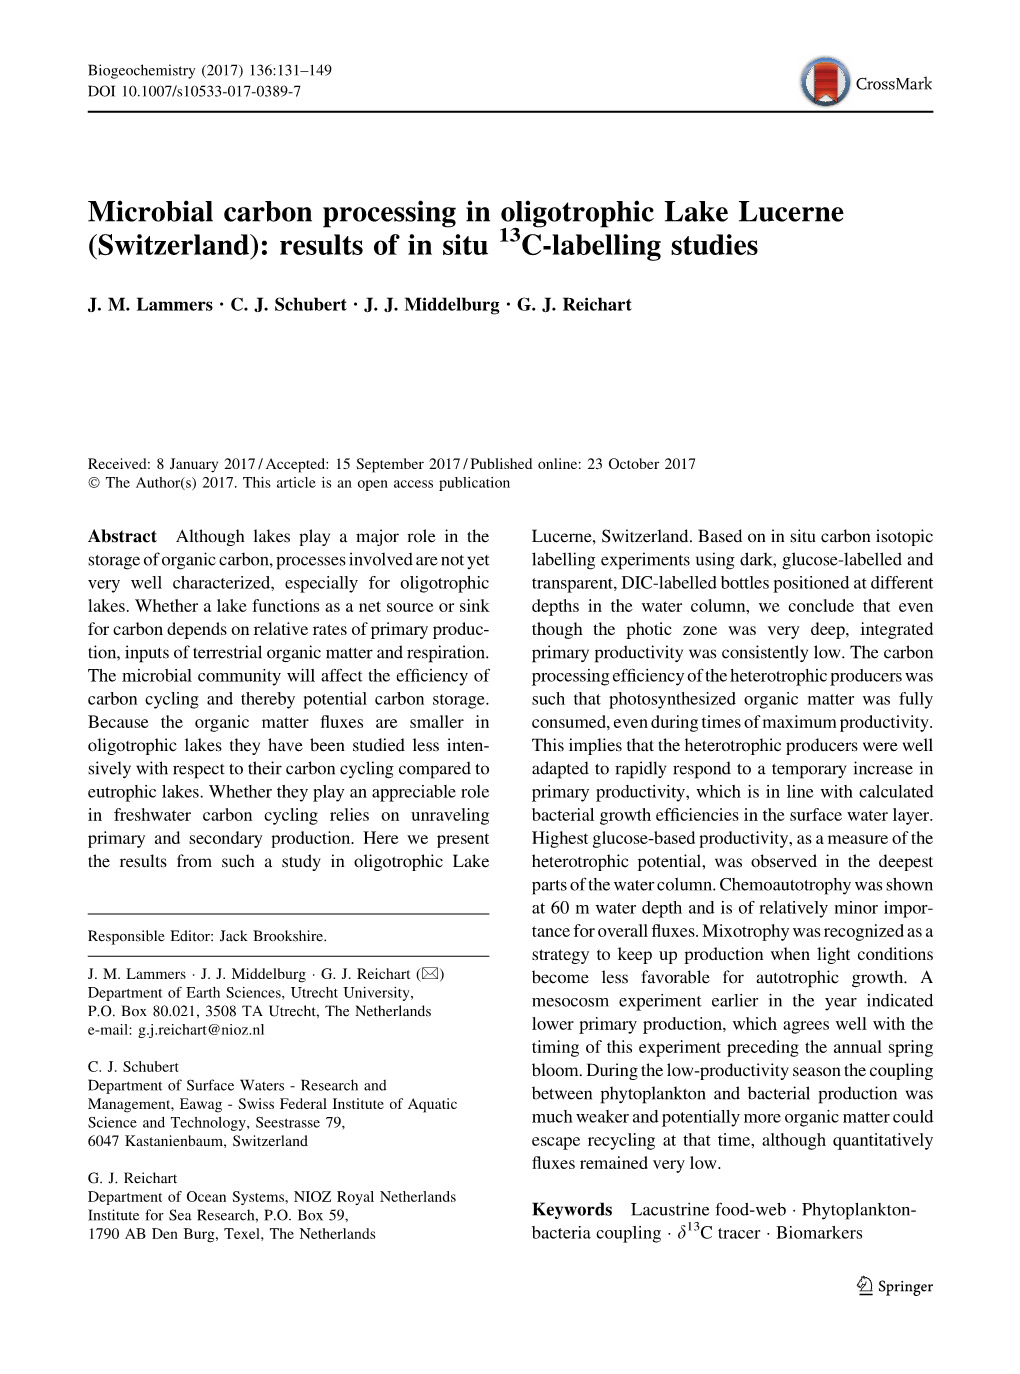 Microbial Carbon Processing in Oligotrophic Lake Lucerne (Switzerland): Results of in Situ 13C-Labelling Studies